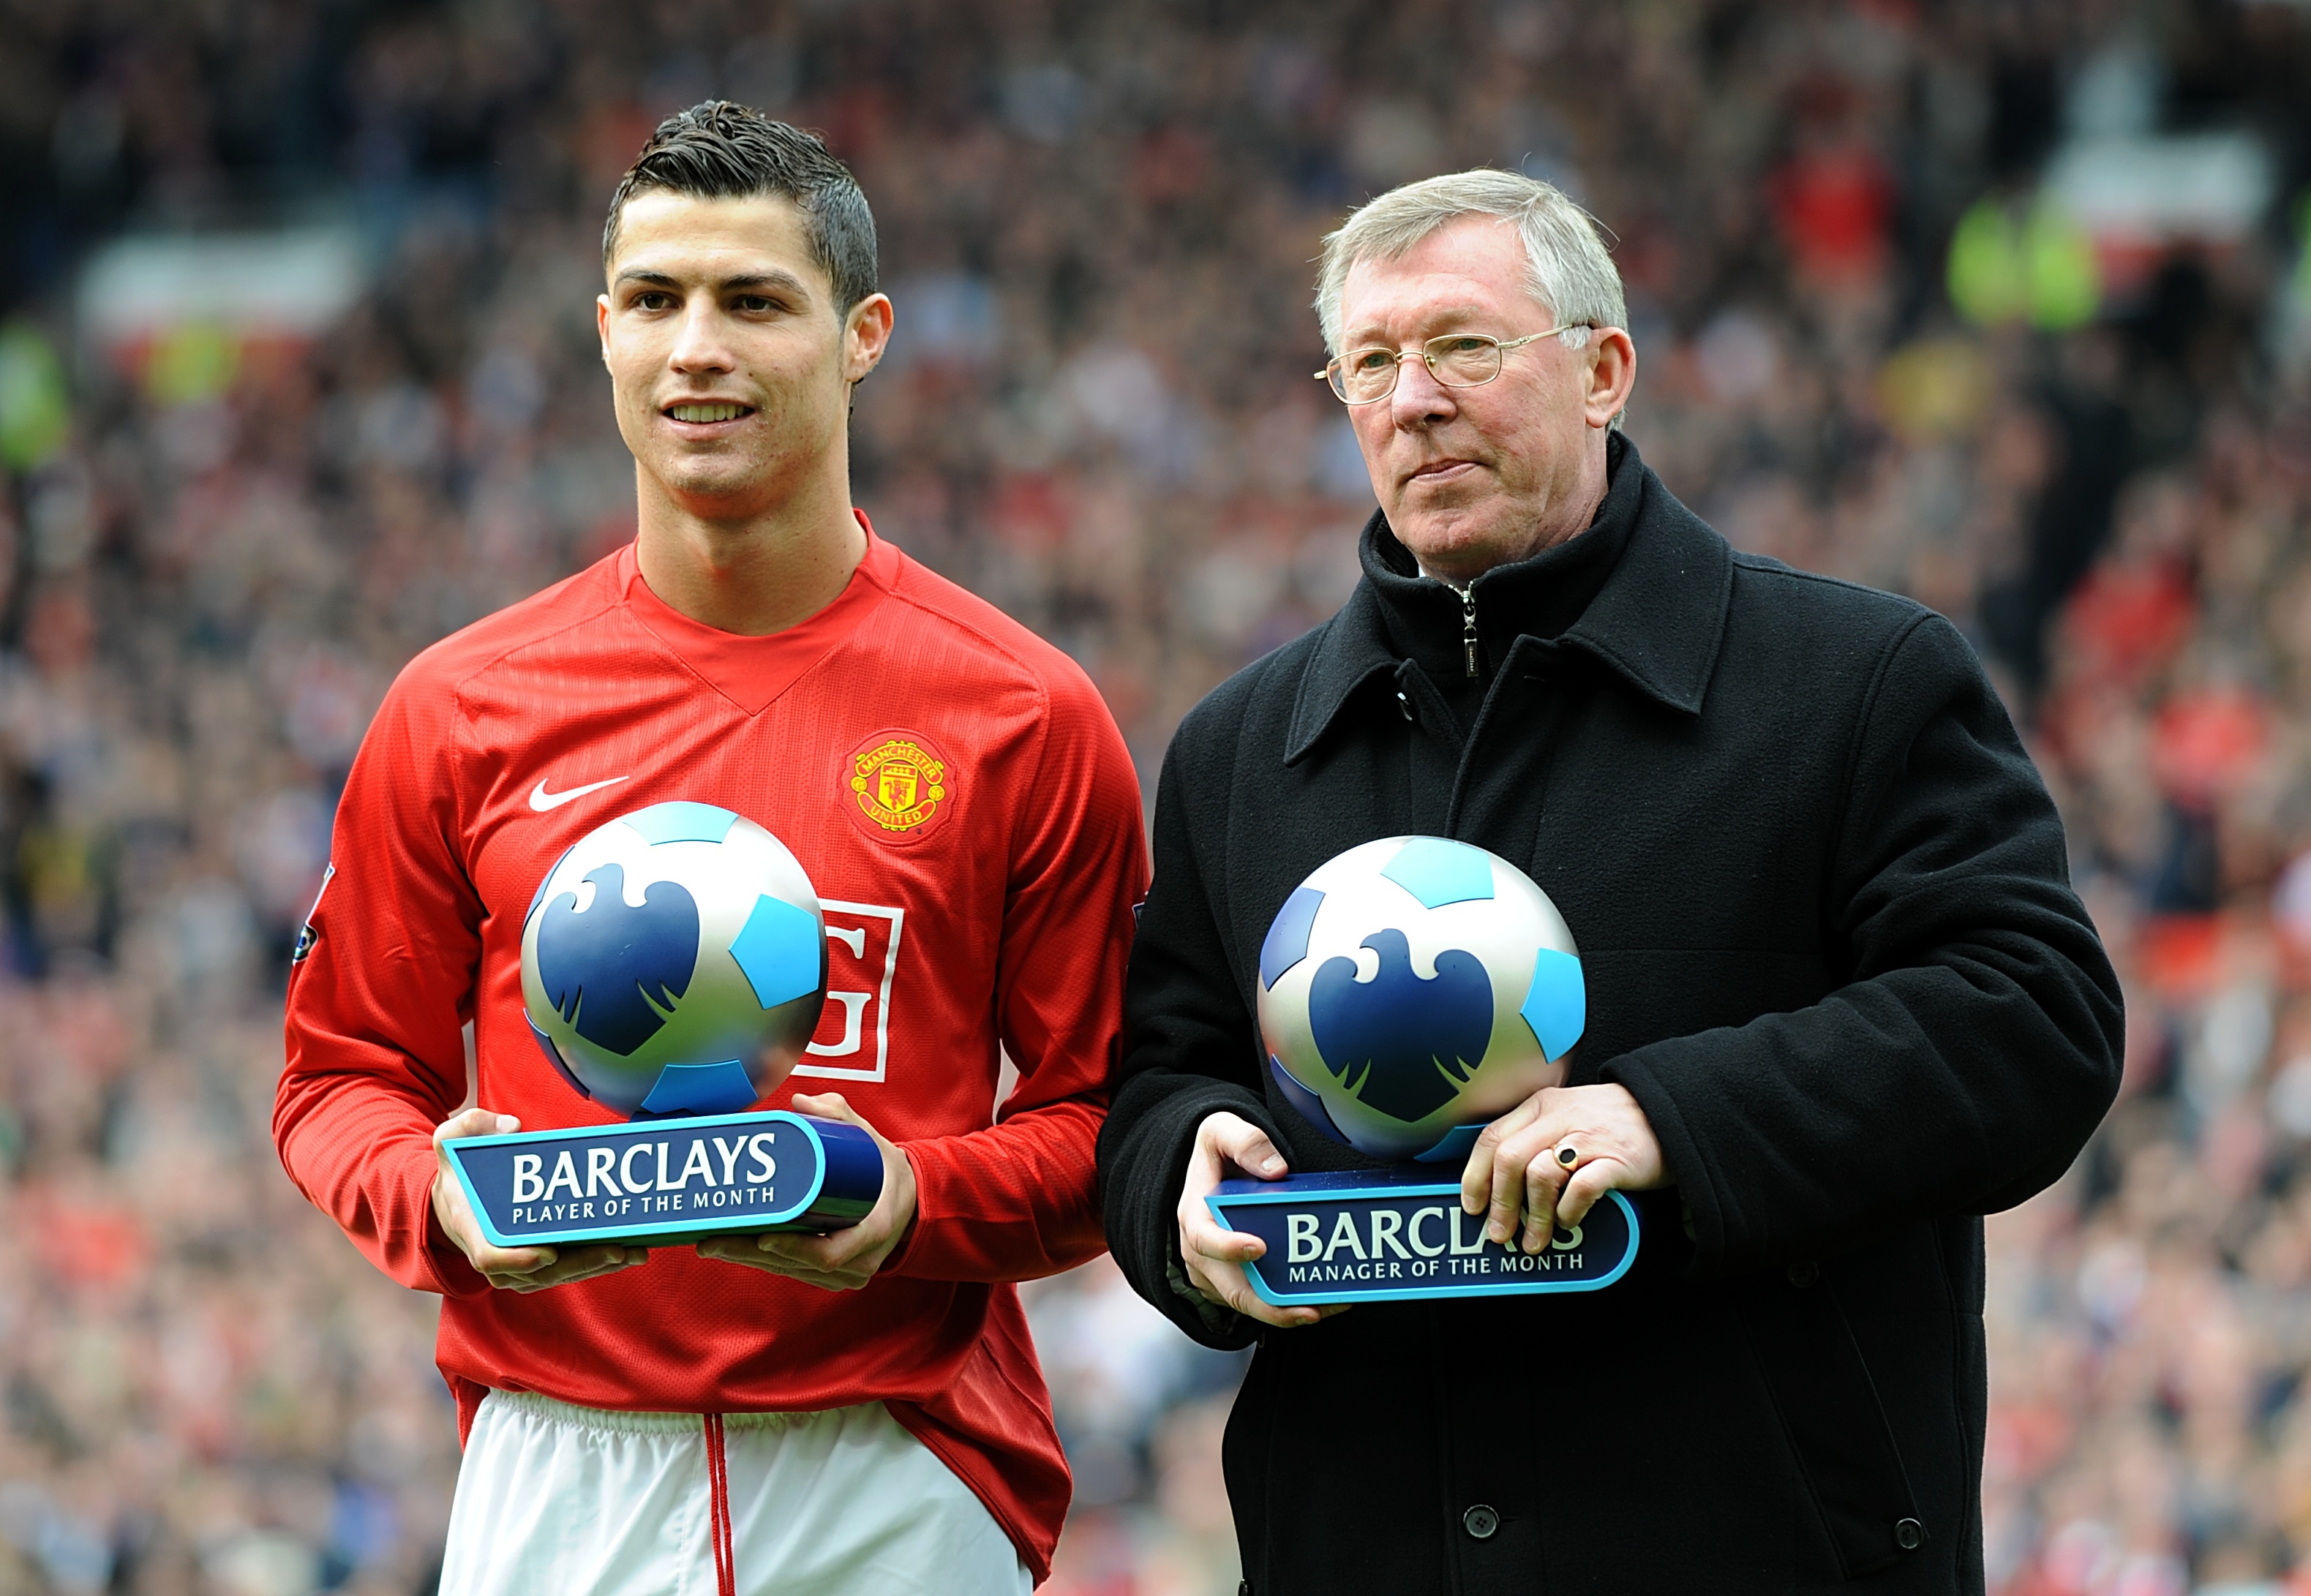 Cristiano Ronaldo and Sir Alex Ferguson receive trophies during their time at Manchester United